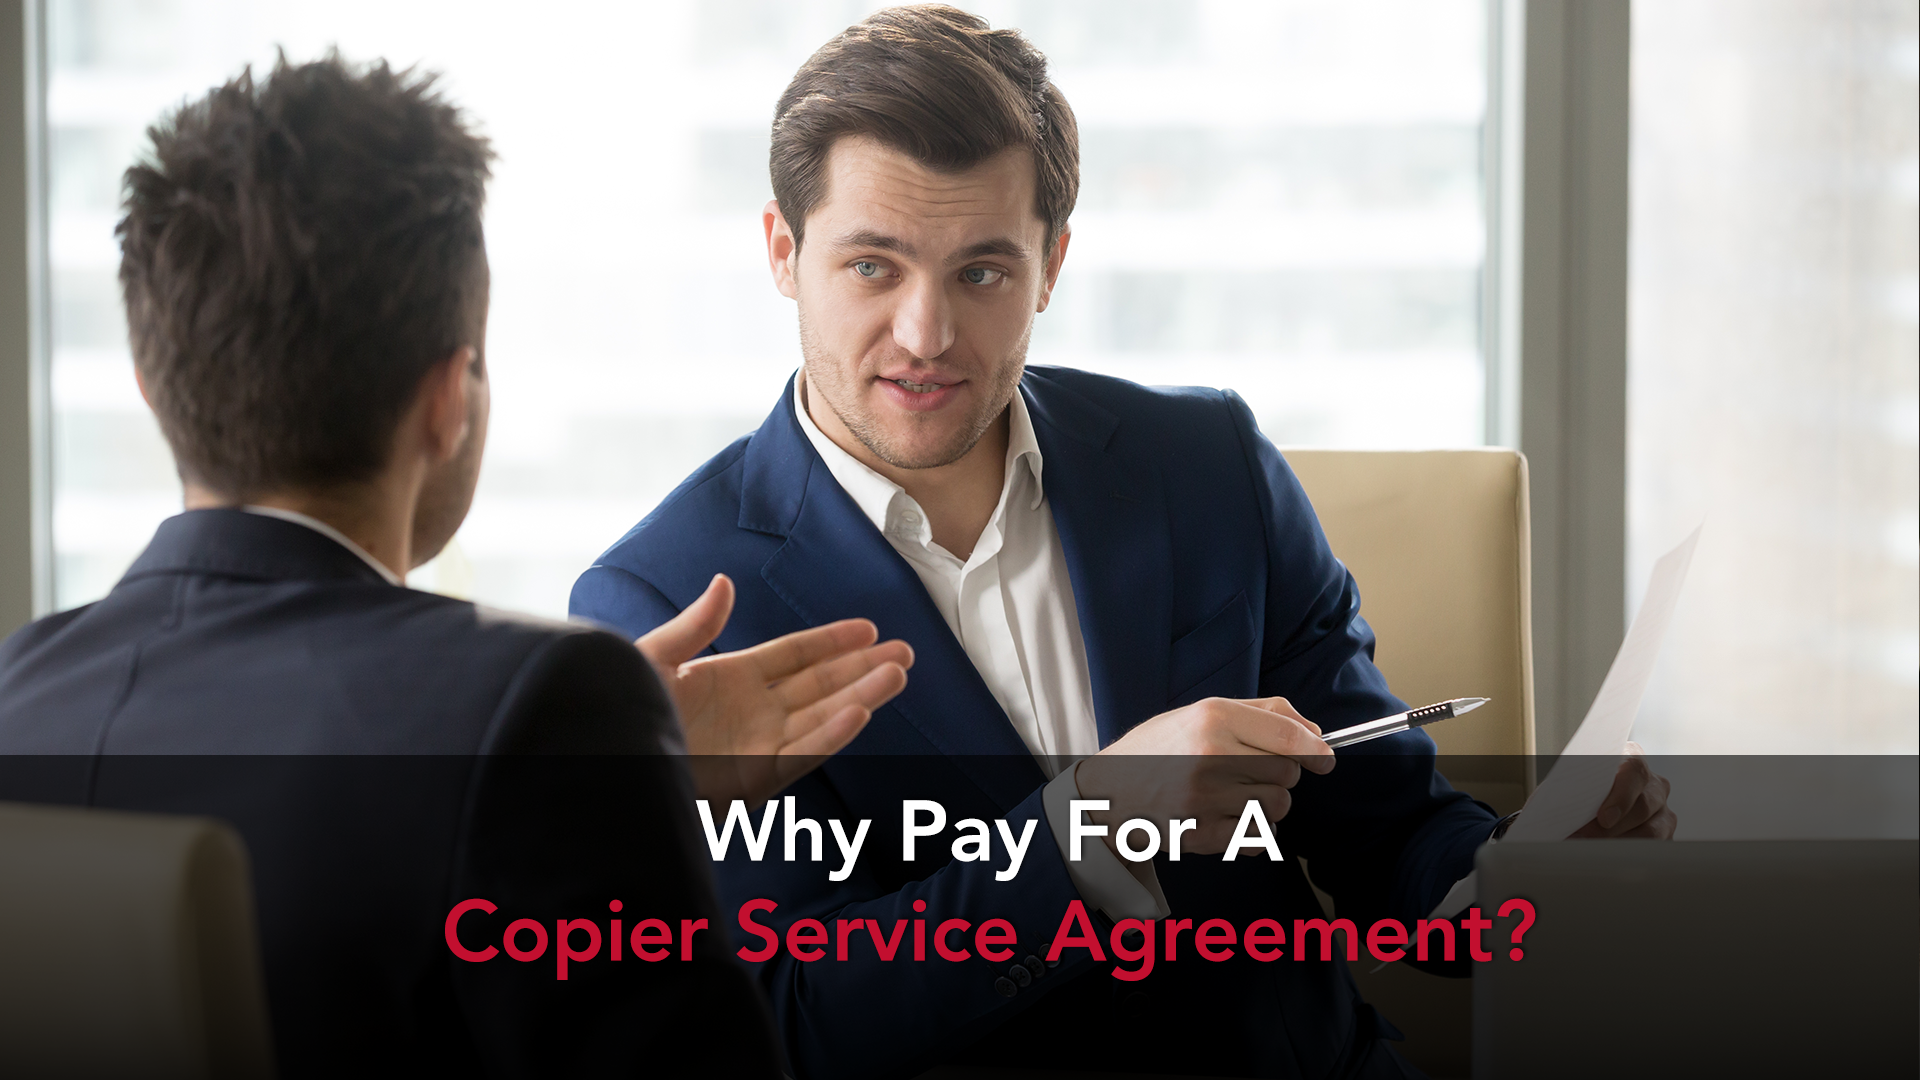 Why Pay for a Copier Service Agreement